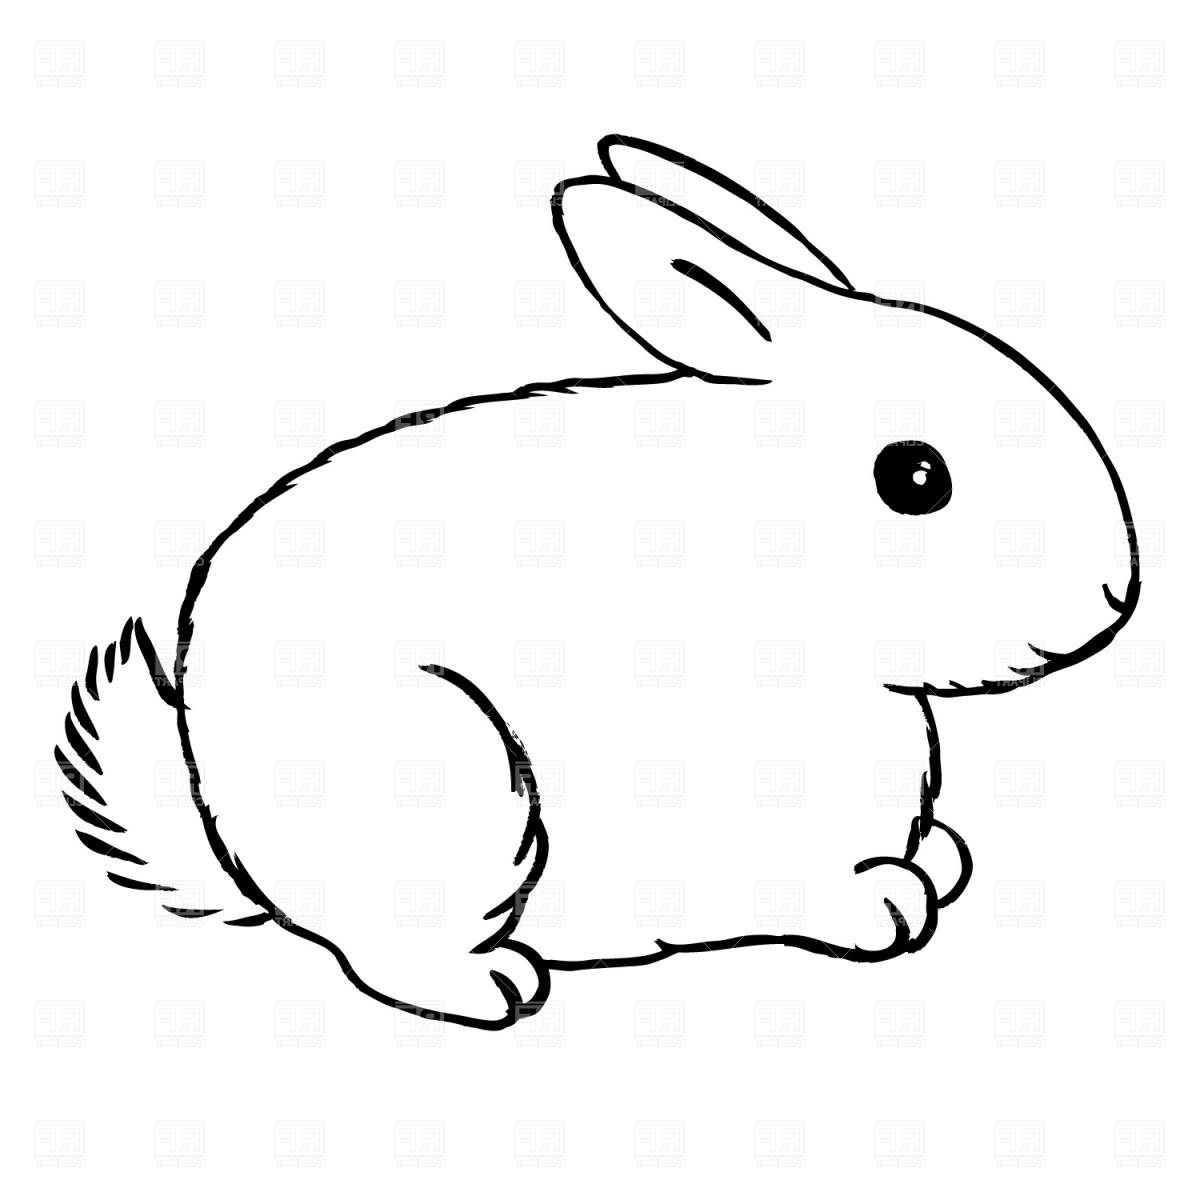 Bunny clipart black and white Inspirational Top